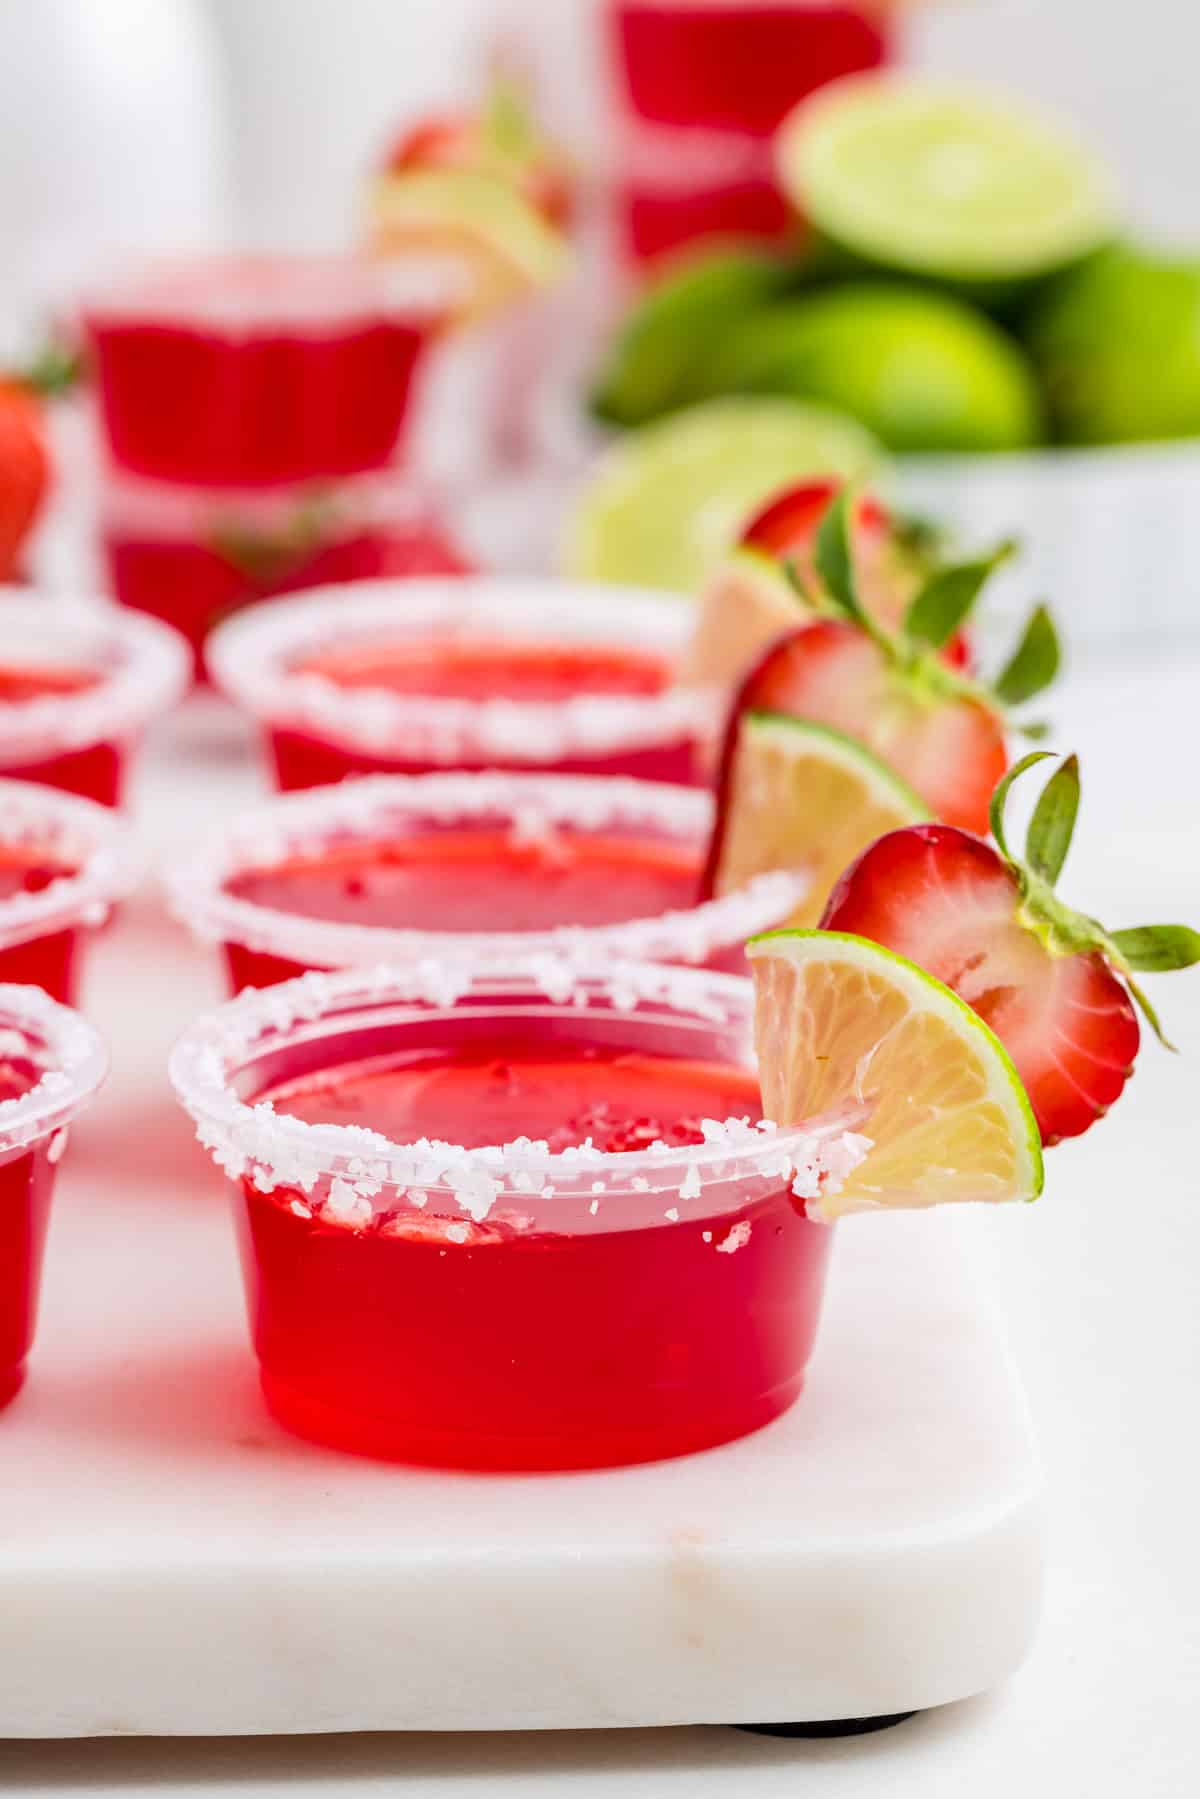 Shots lined up in a row showing off their salt, lime and strawberry garnishes.